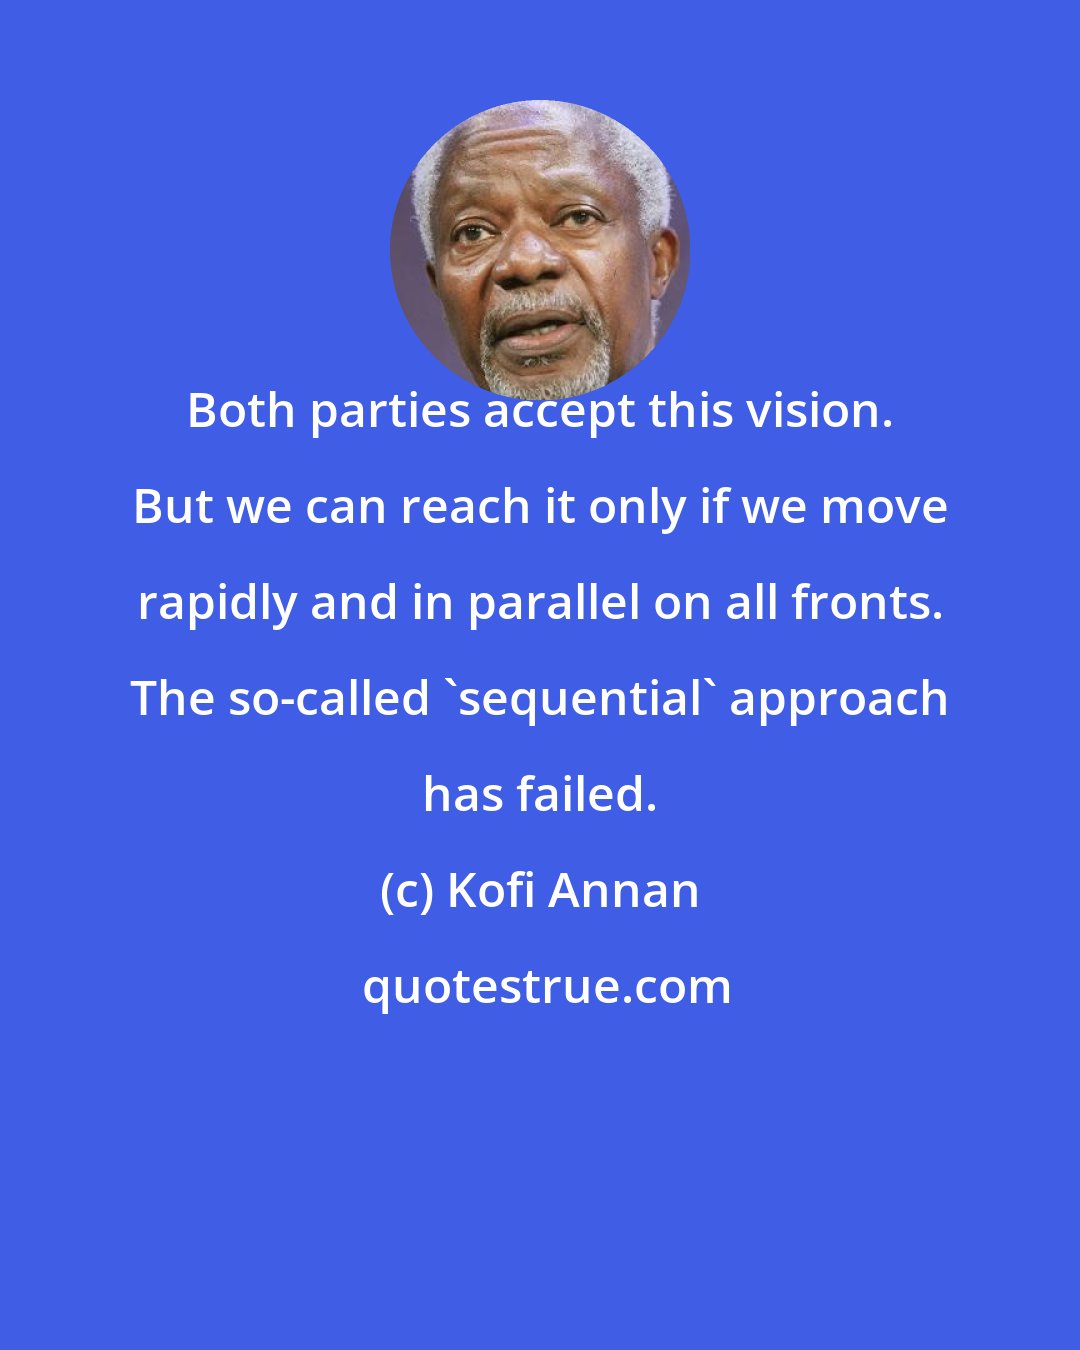 Kofi Annan: Both parties accept this vision. But we can reach it only if we move rapidly and in parallel on all fronts. The so-called 'sequential' approach has failed.